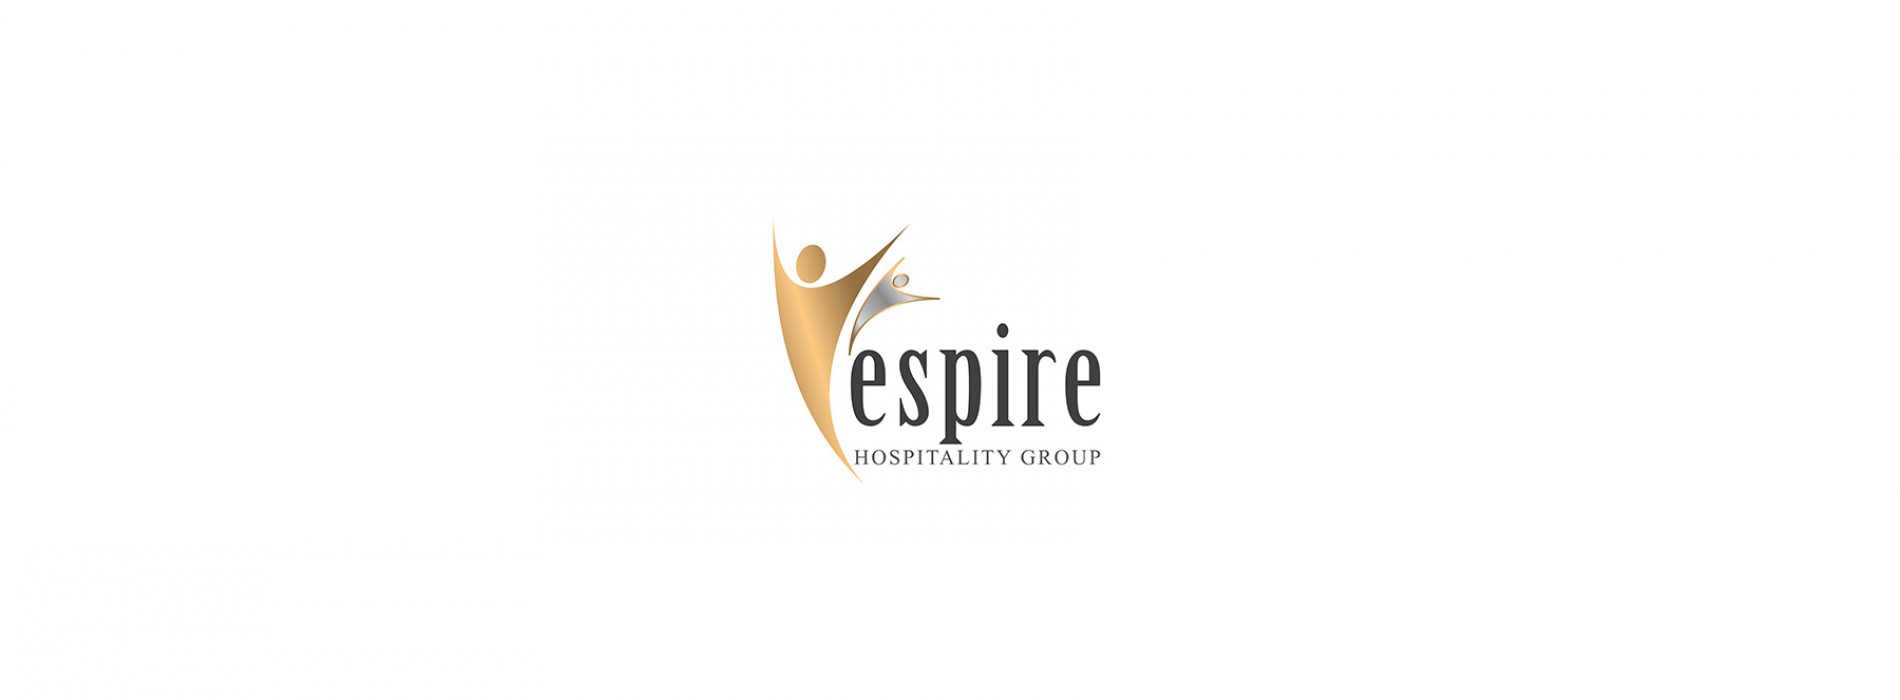 Espire Hospitality Group successfully concludes its first travel trade roadshow  in Mumbai and Pune, setting the stage for collaboration and growth